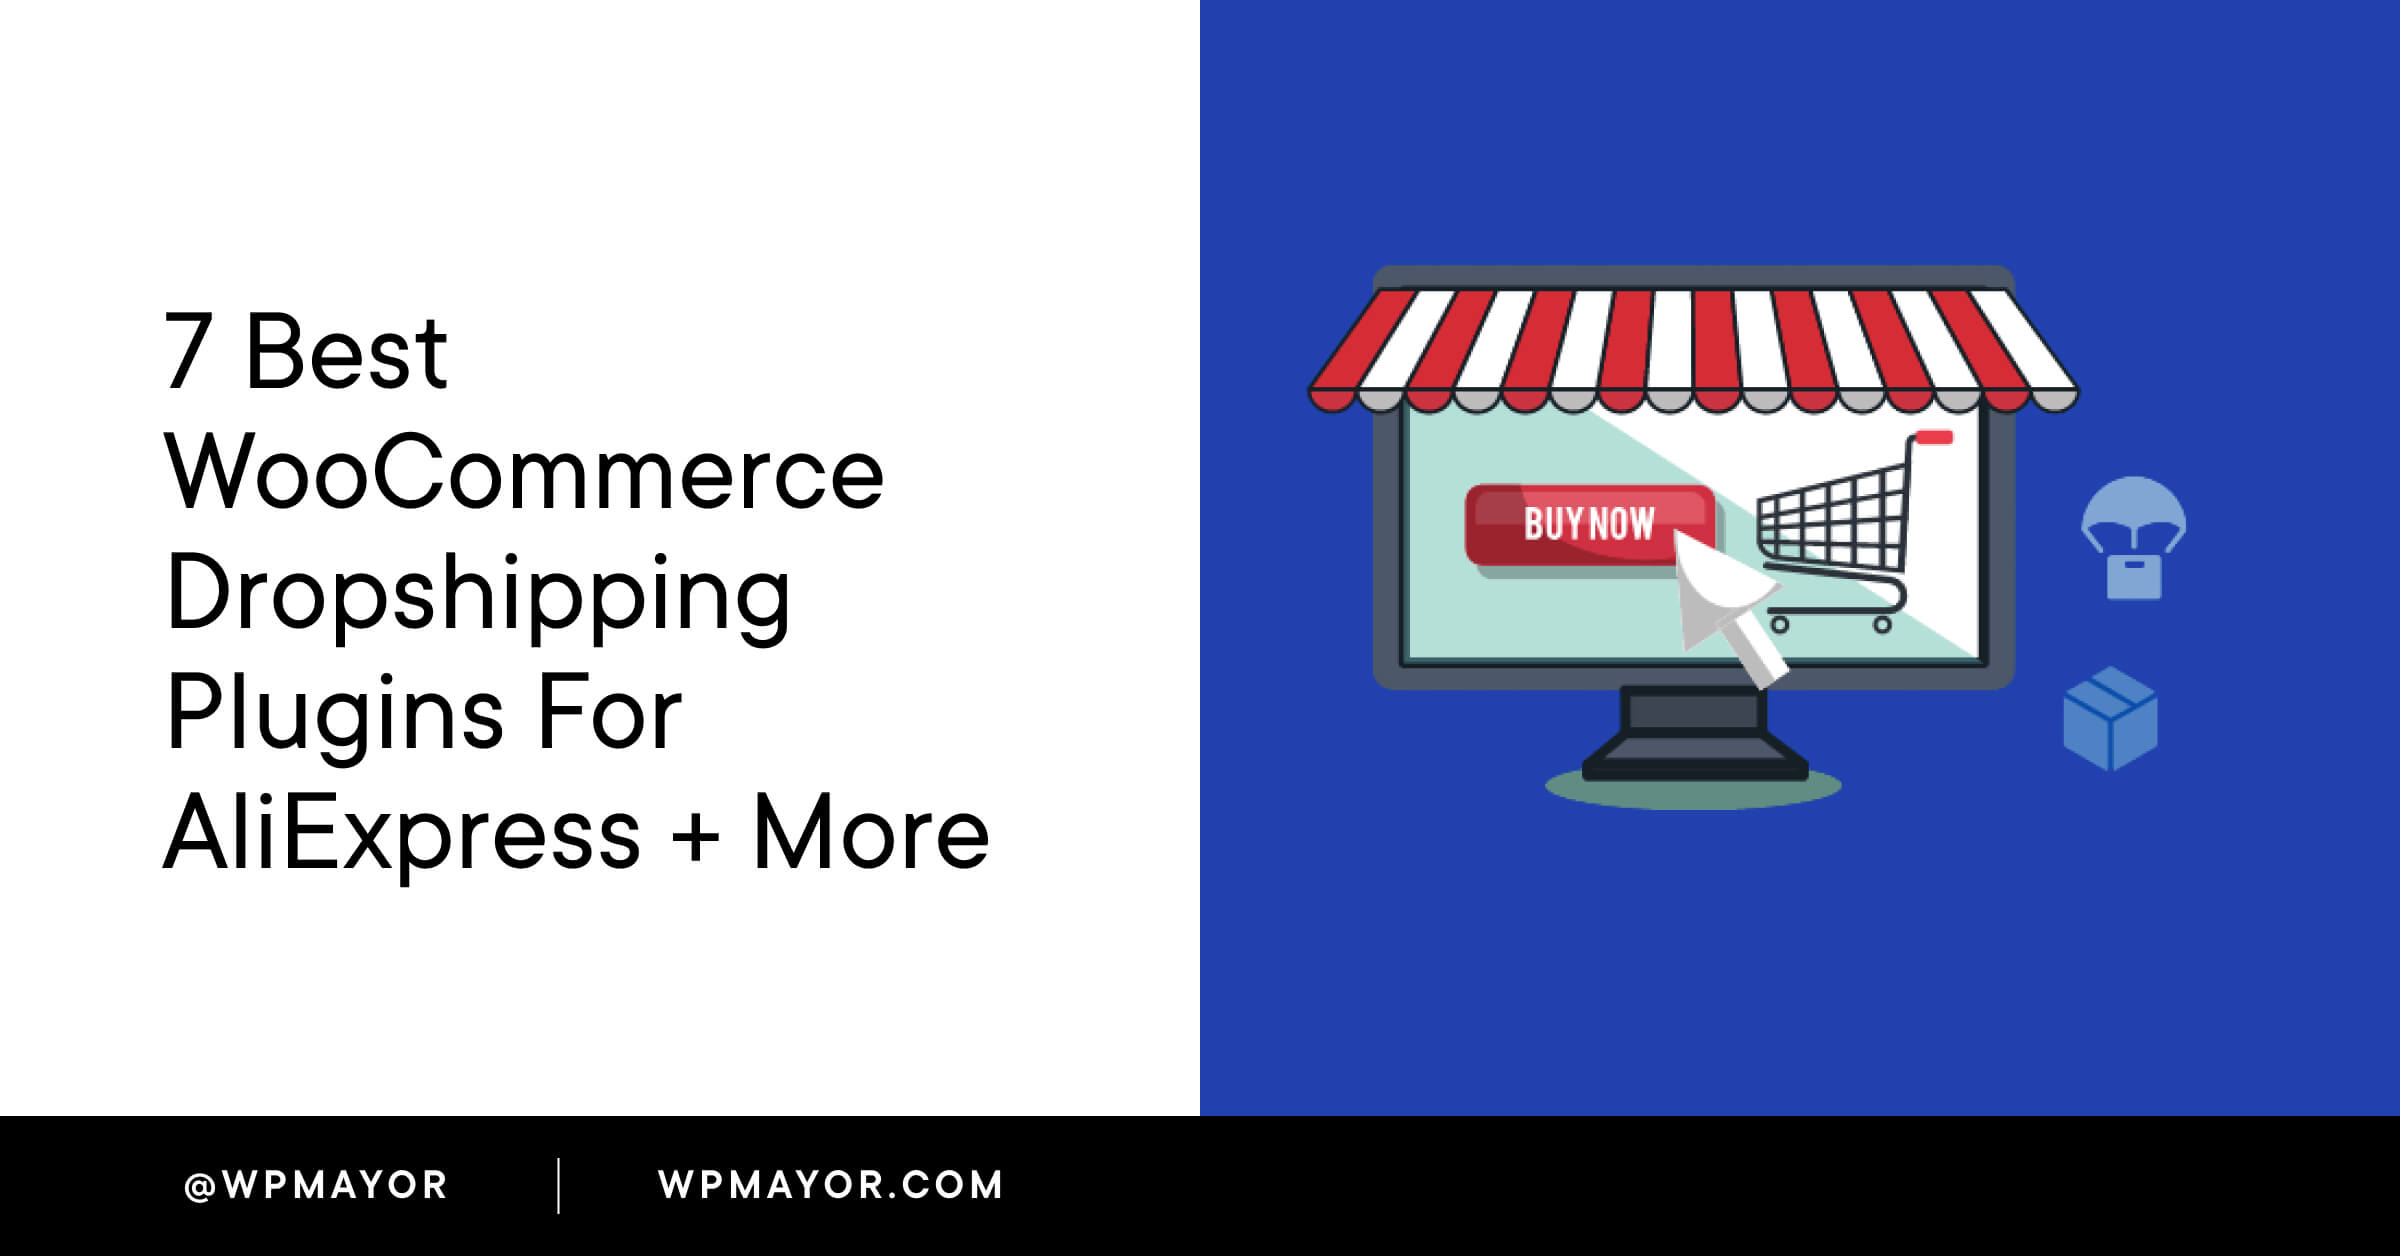 7 Best WooCommerce Dropshipping Plugins for AliExpress + More